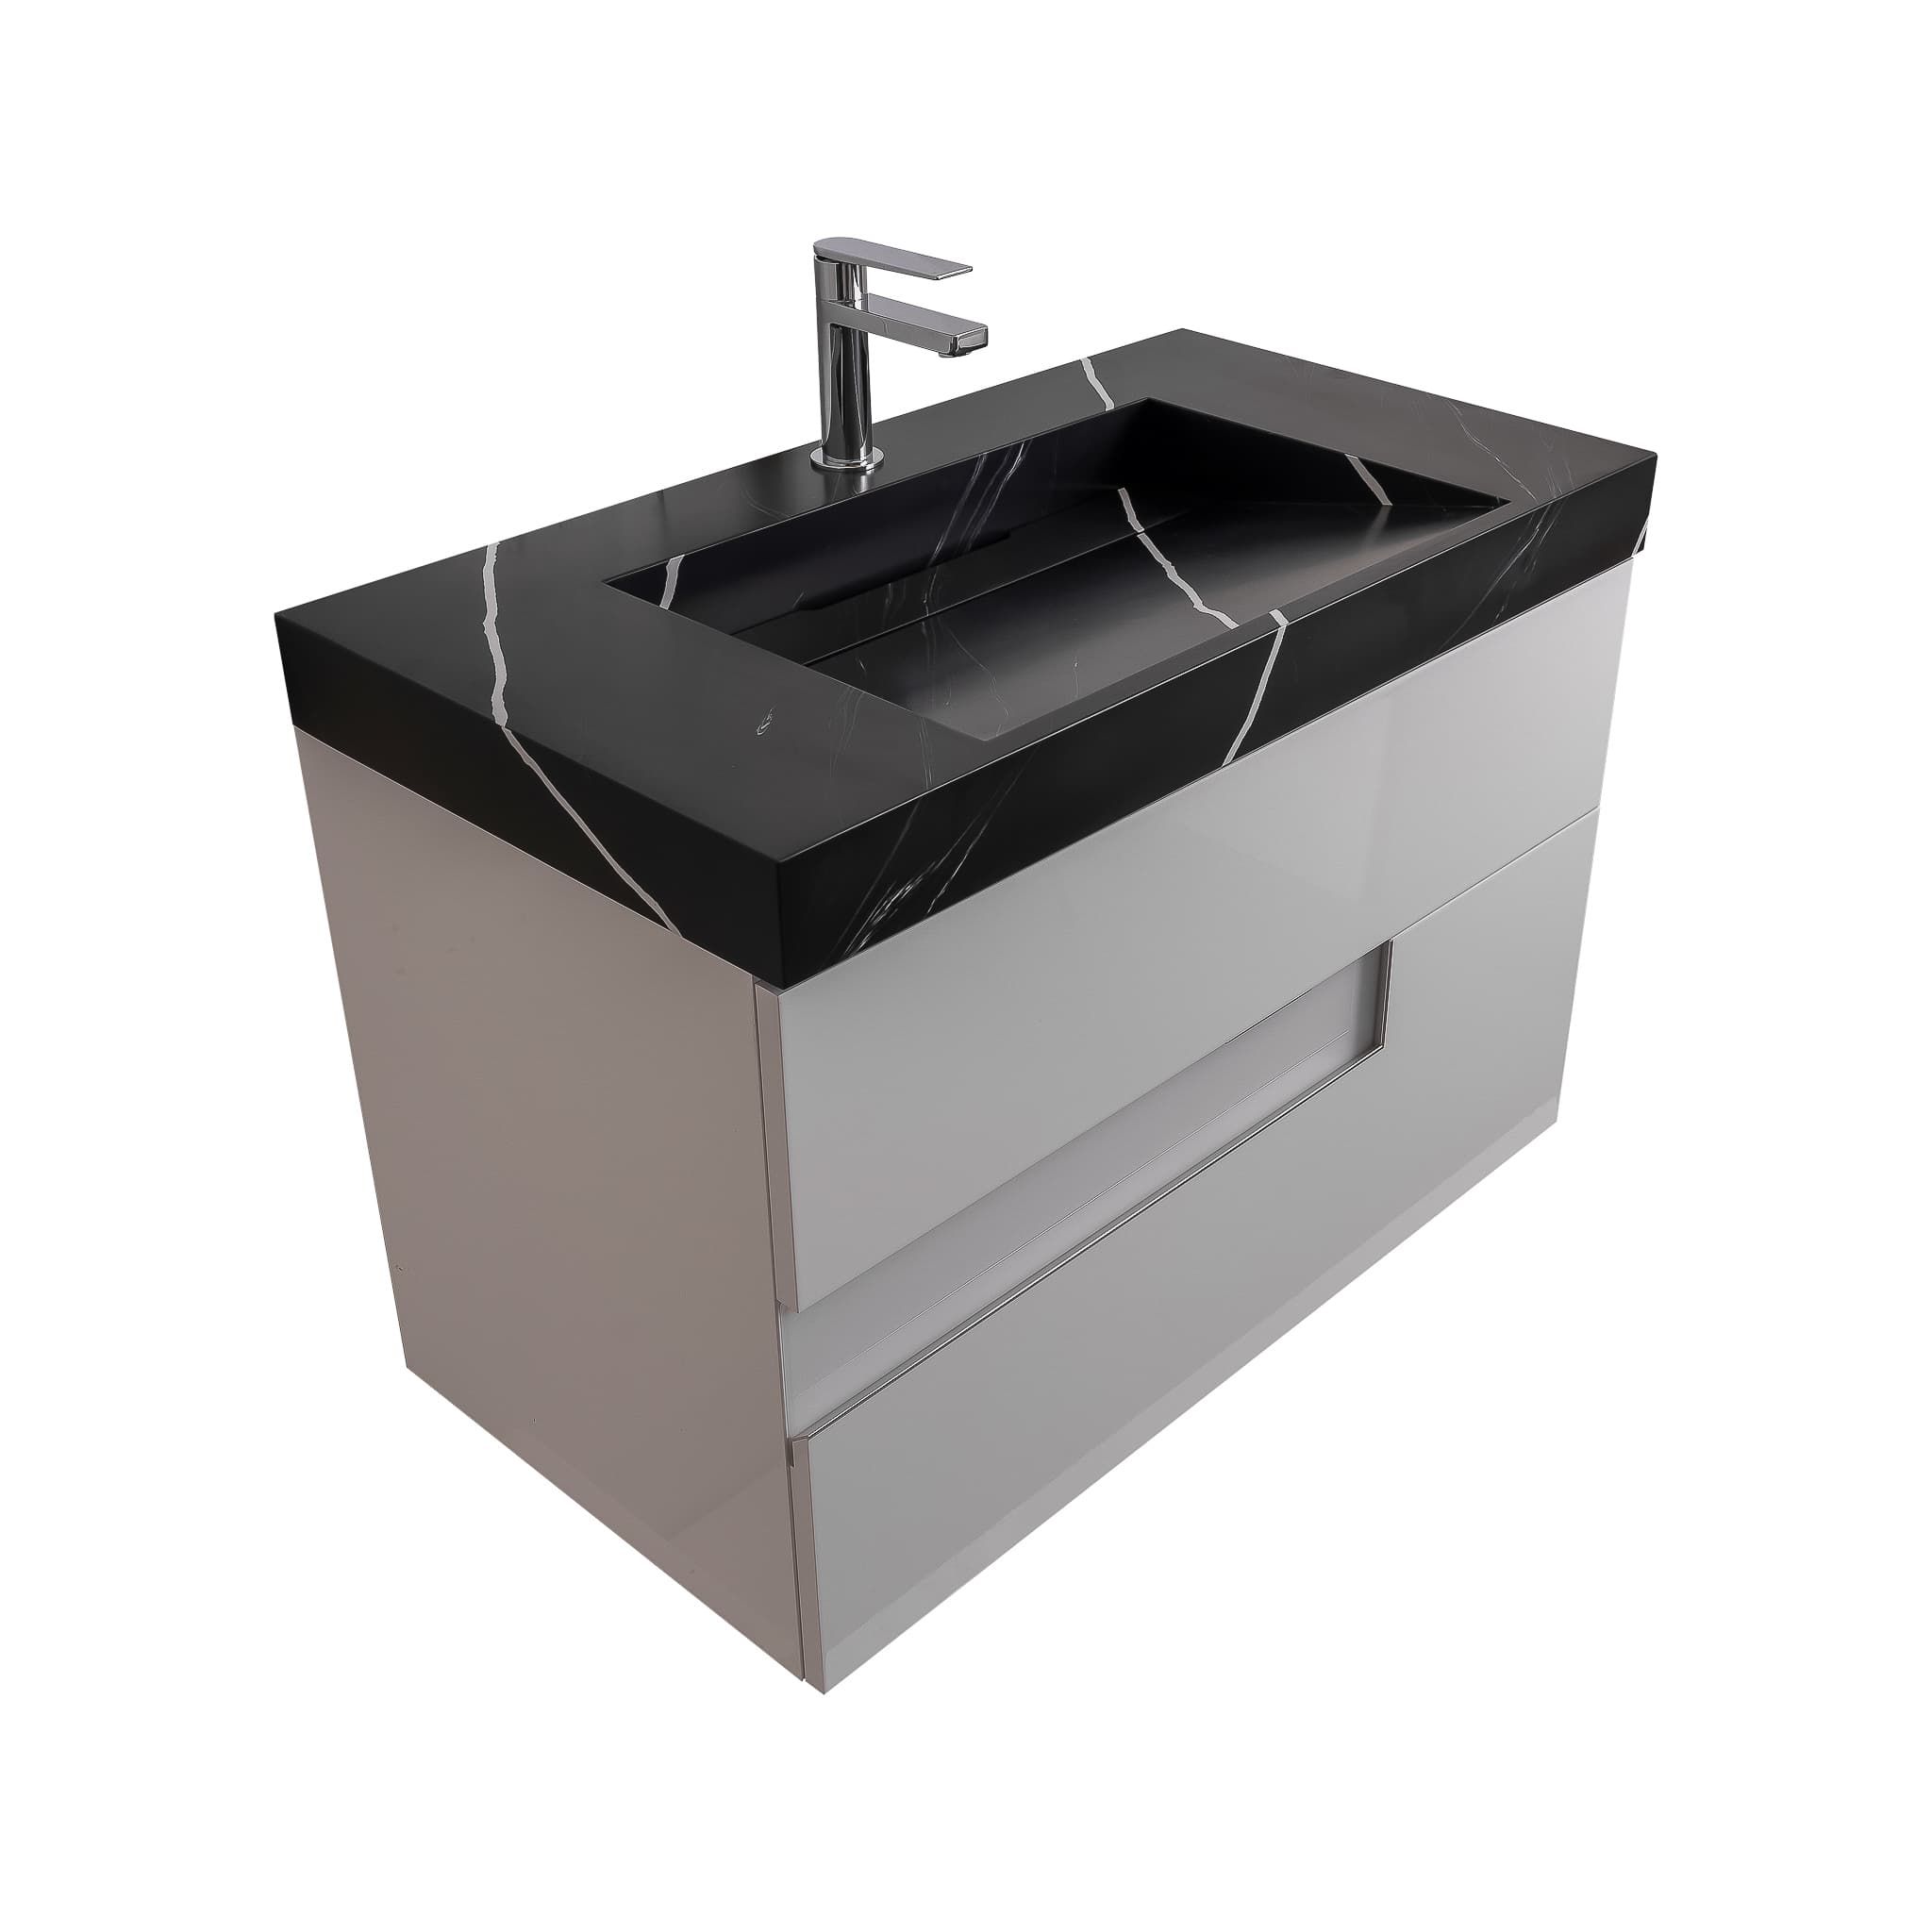 Vision 39.5 White High Gloss Cabinet, Solid Surface Matte Black Carrara Infinity Sink, Wall Mounted Modern Vanity Set